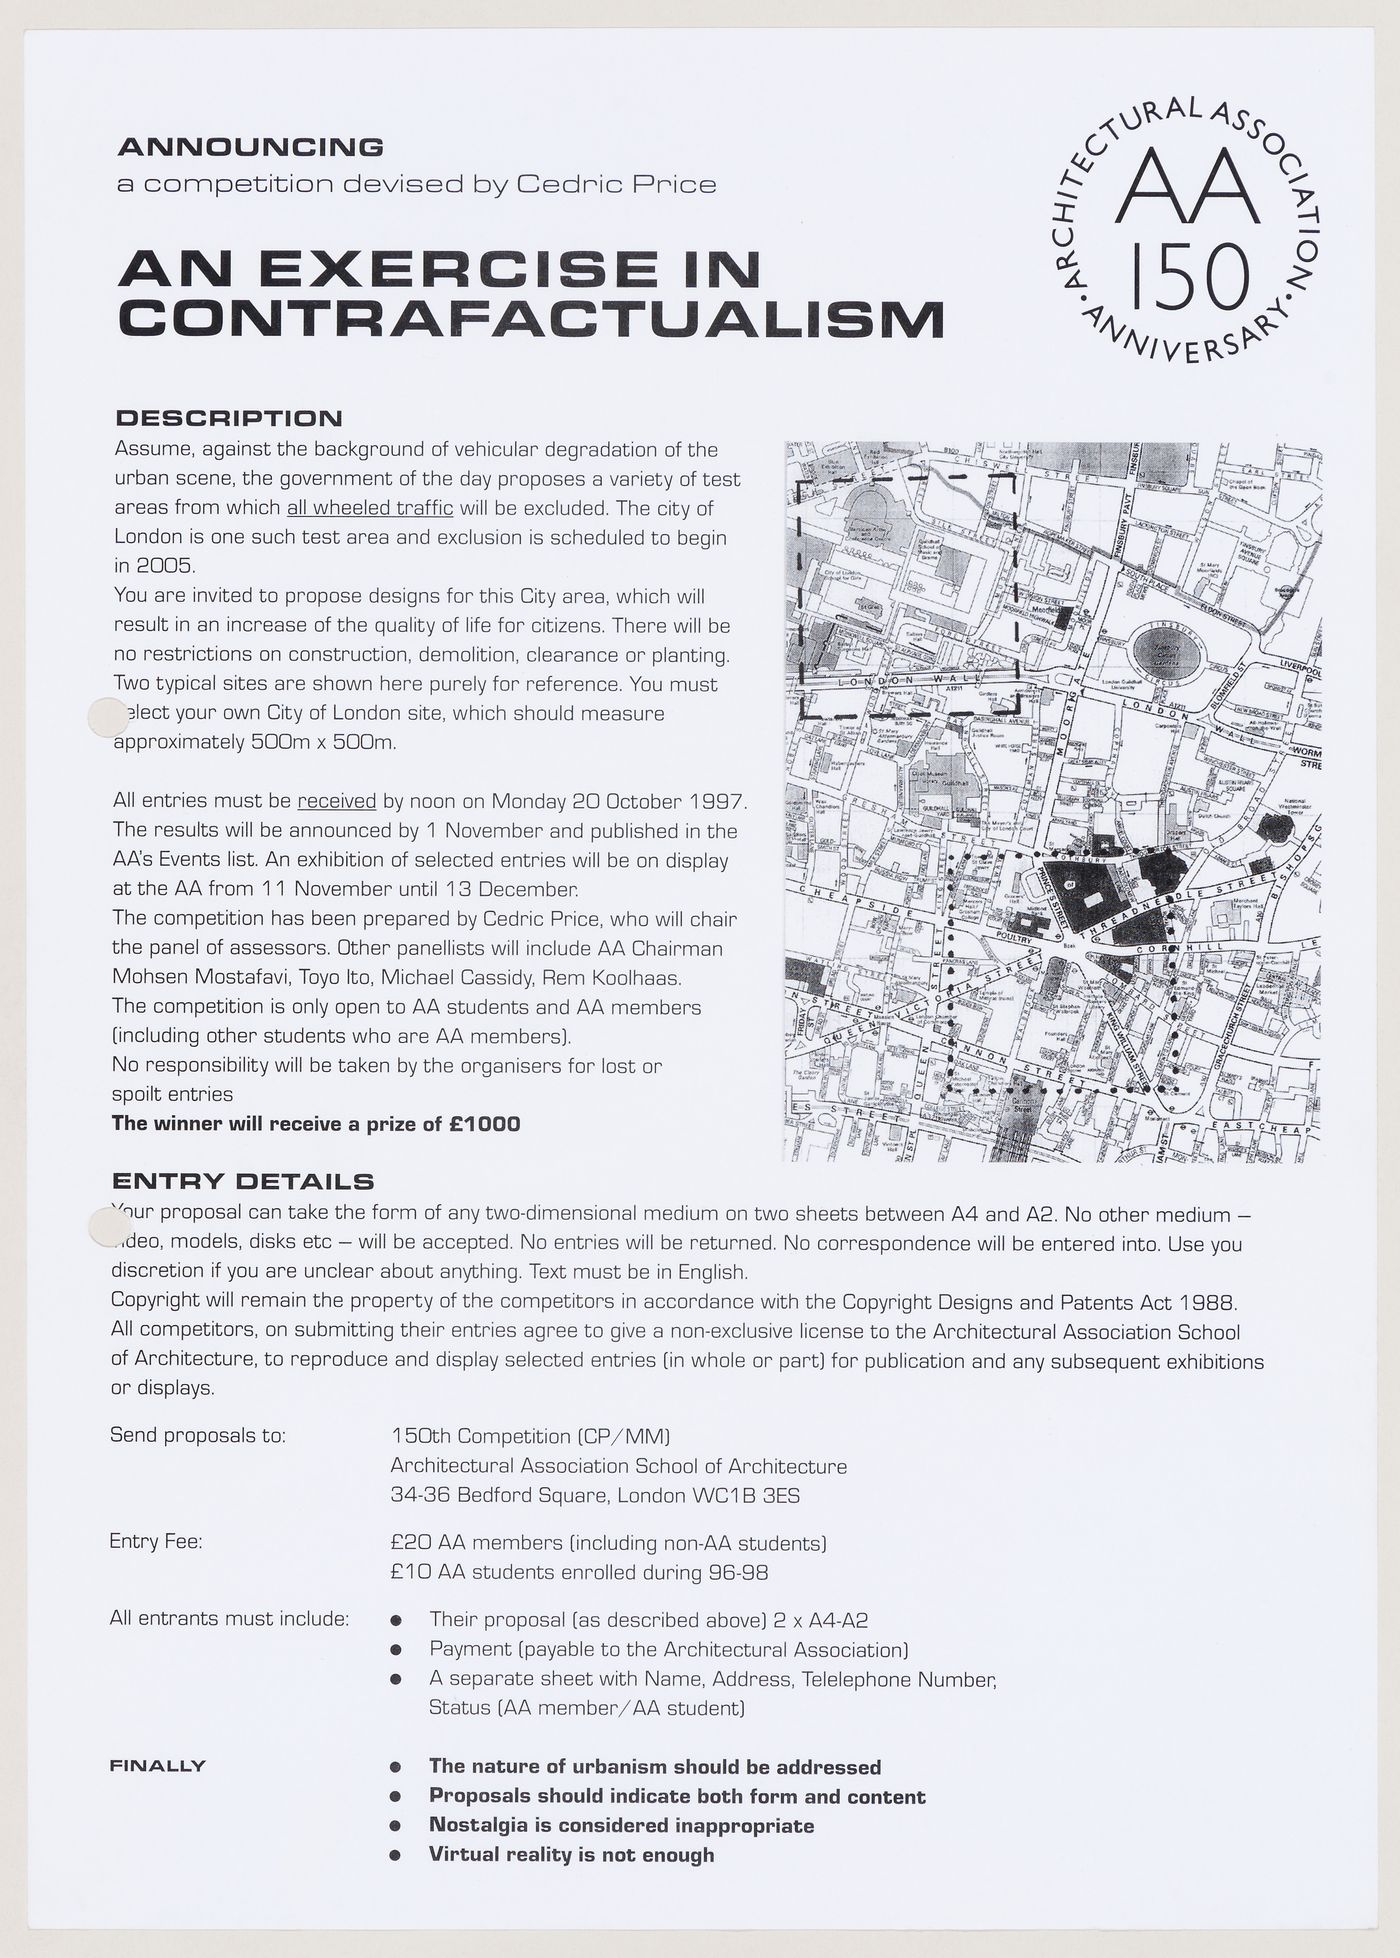 Announcement for a competition prepared by Cedric Price on the occasion of the 150th anniversary of the Architectural Association